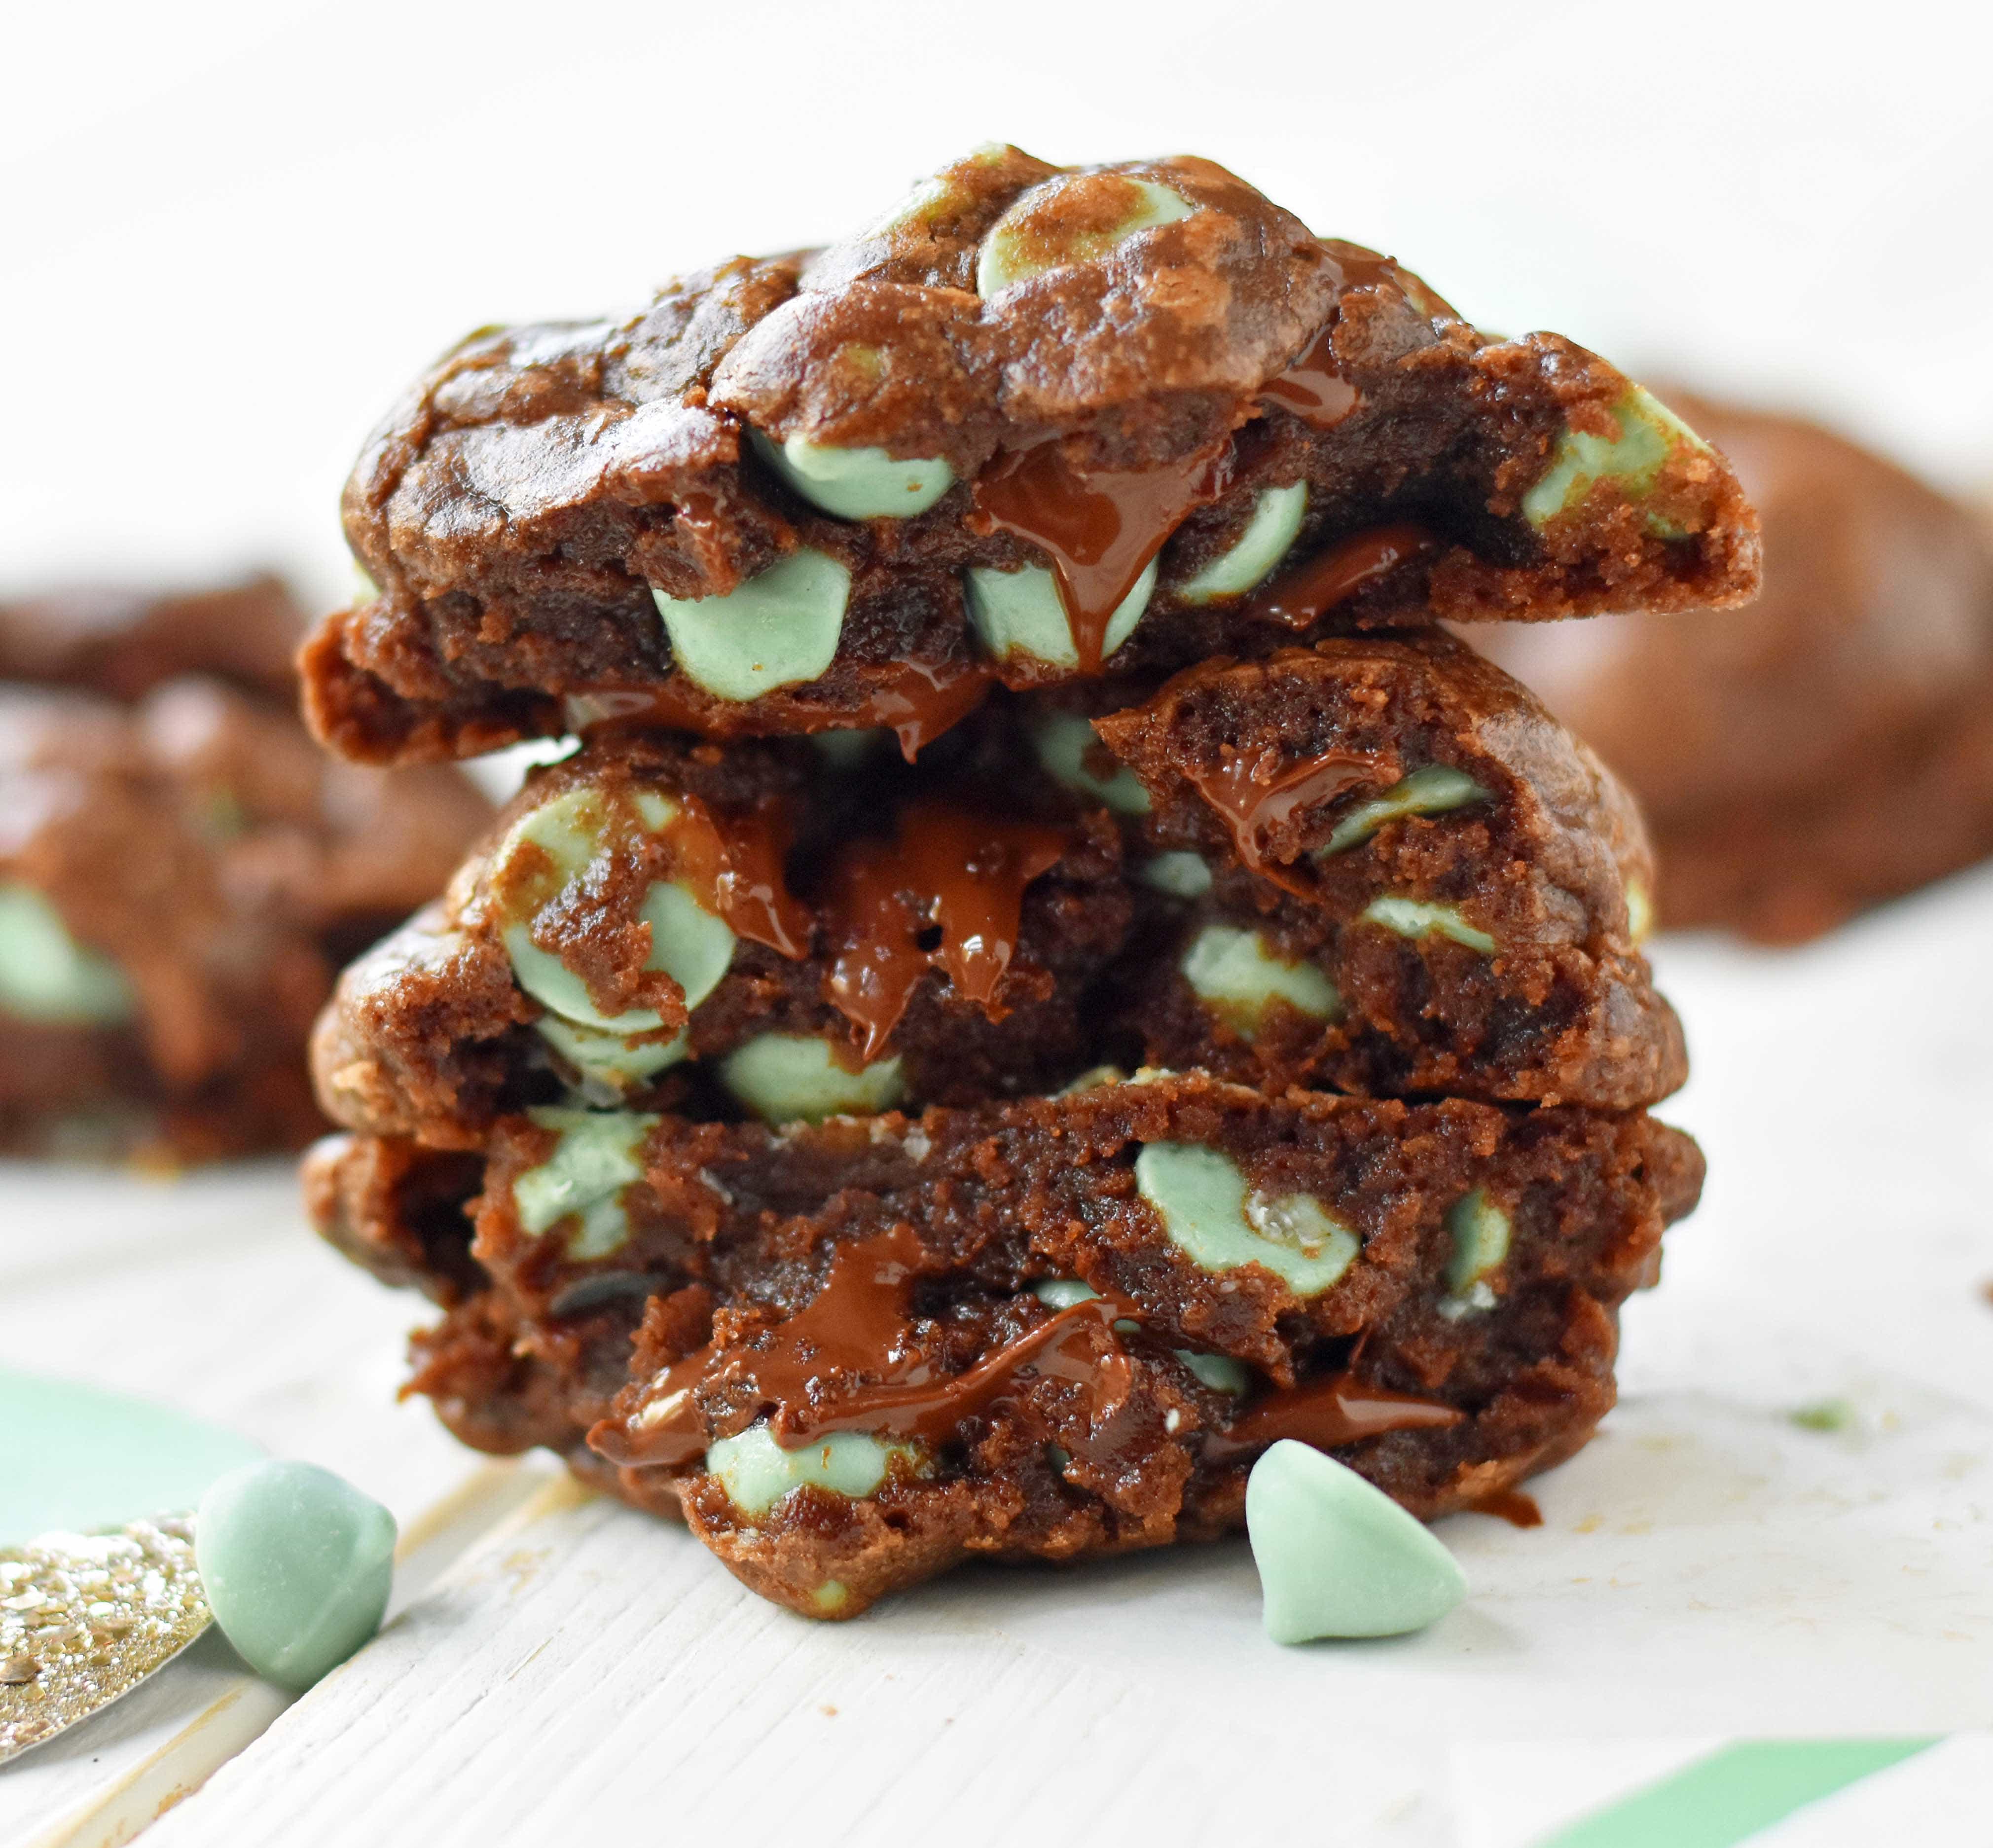 Chocolate Mint Chip Cookies are made with a rich chewy double chocolate cookie with silky smooth mint chips. A perfect chocolate mint cookie! www.modernhoney.com